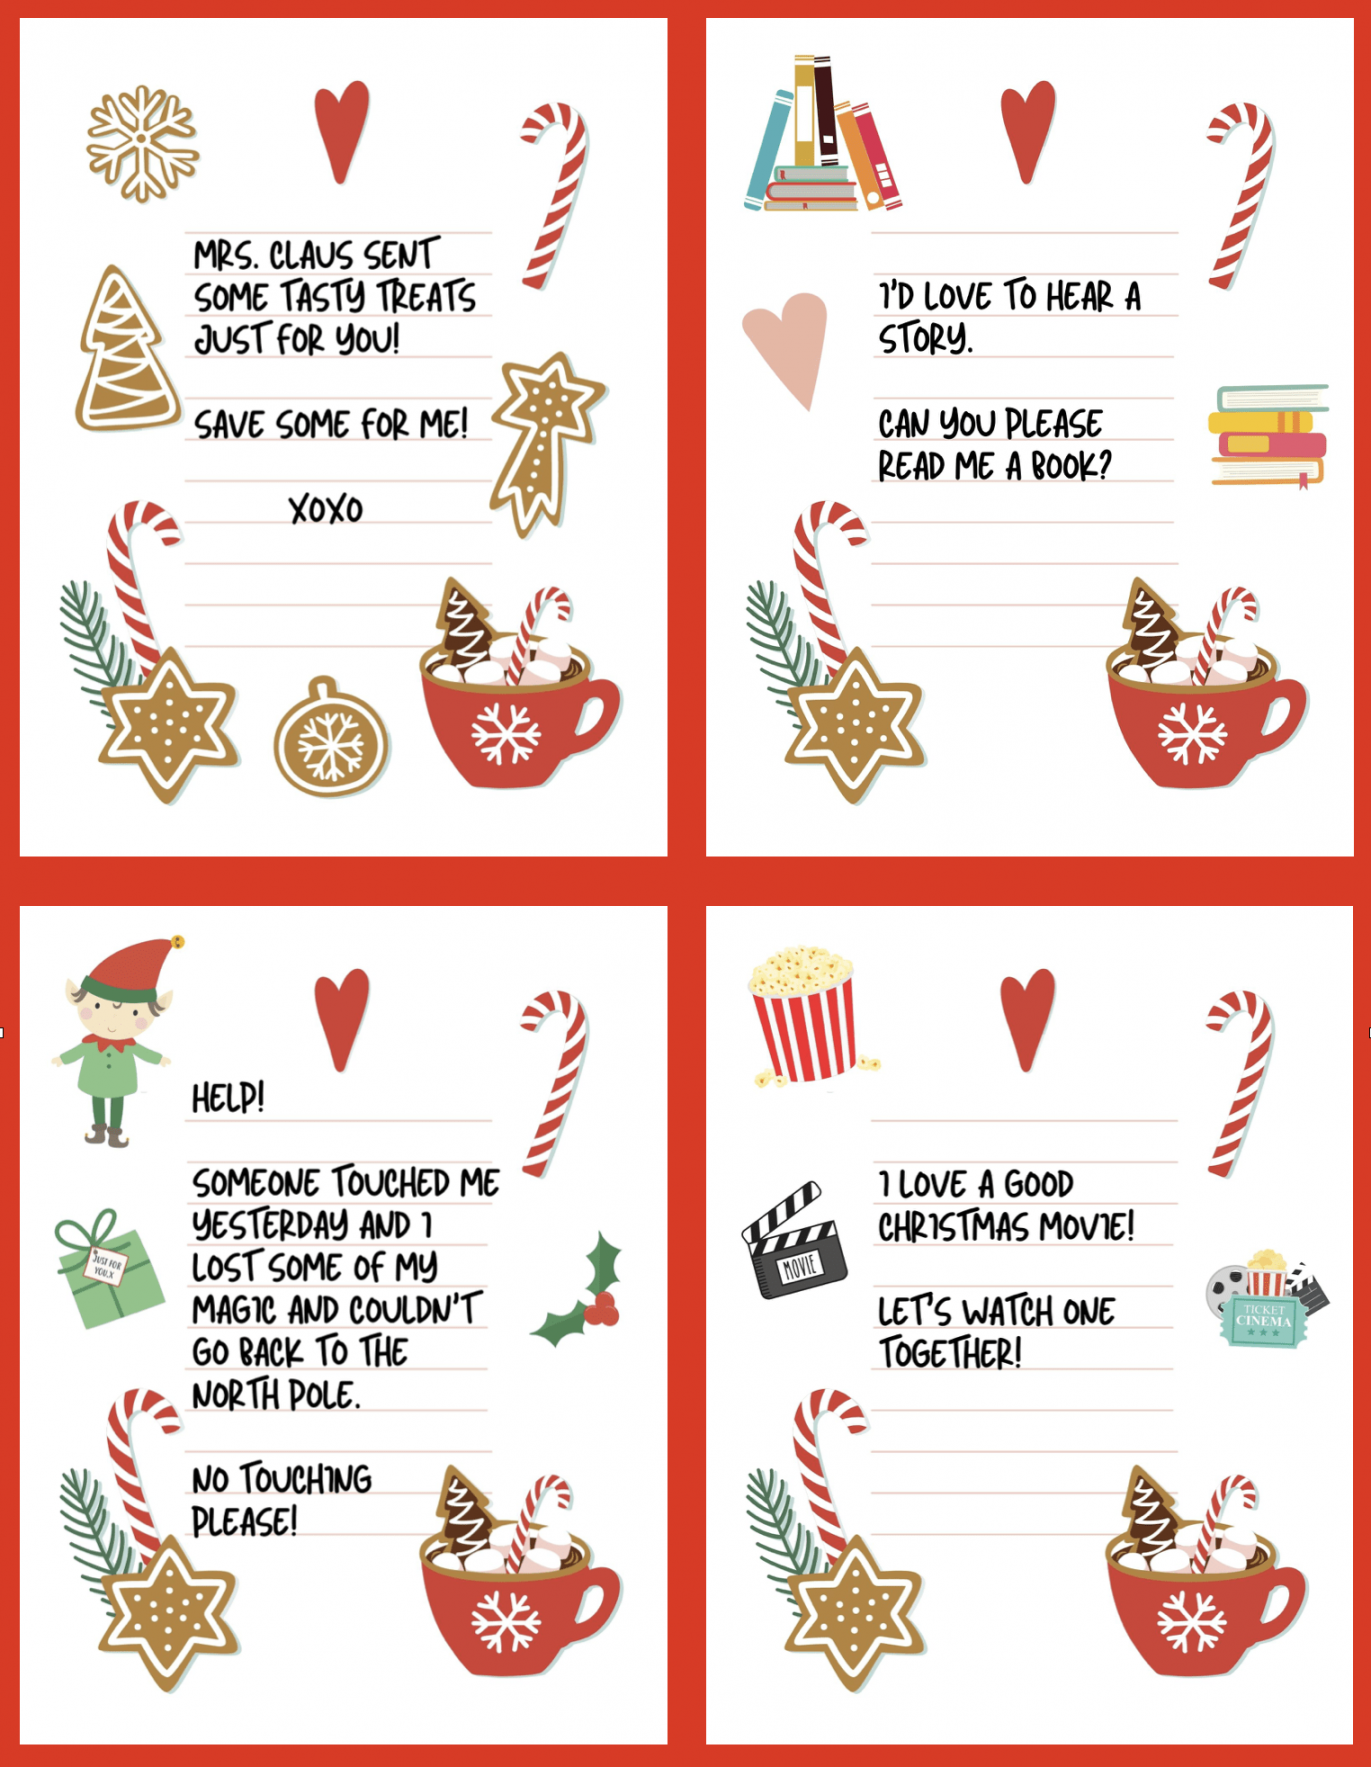 Template Free Elf On The Shelf Printables - Printable -  FREE Elf on the Shelf Notes Printables - Make Life Lovely